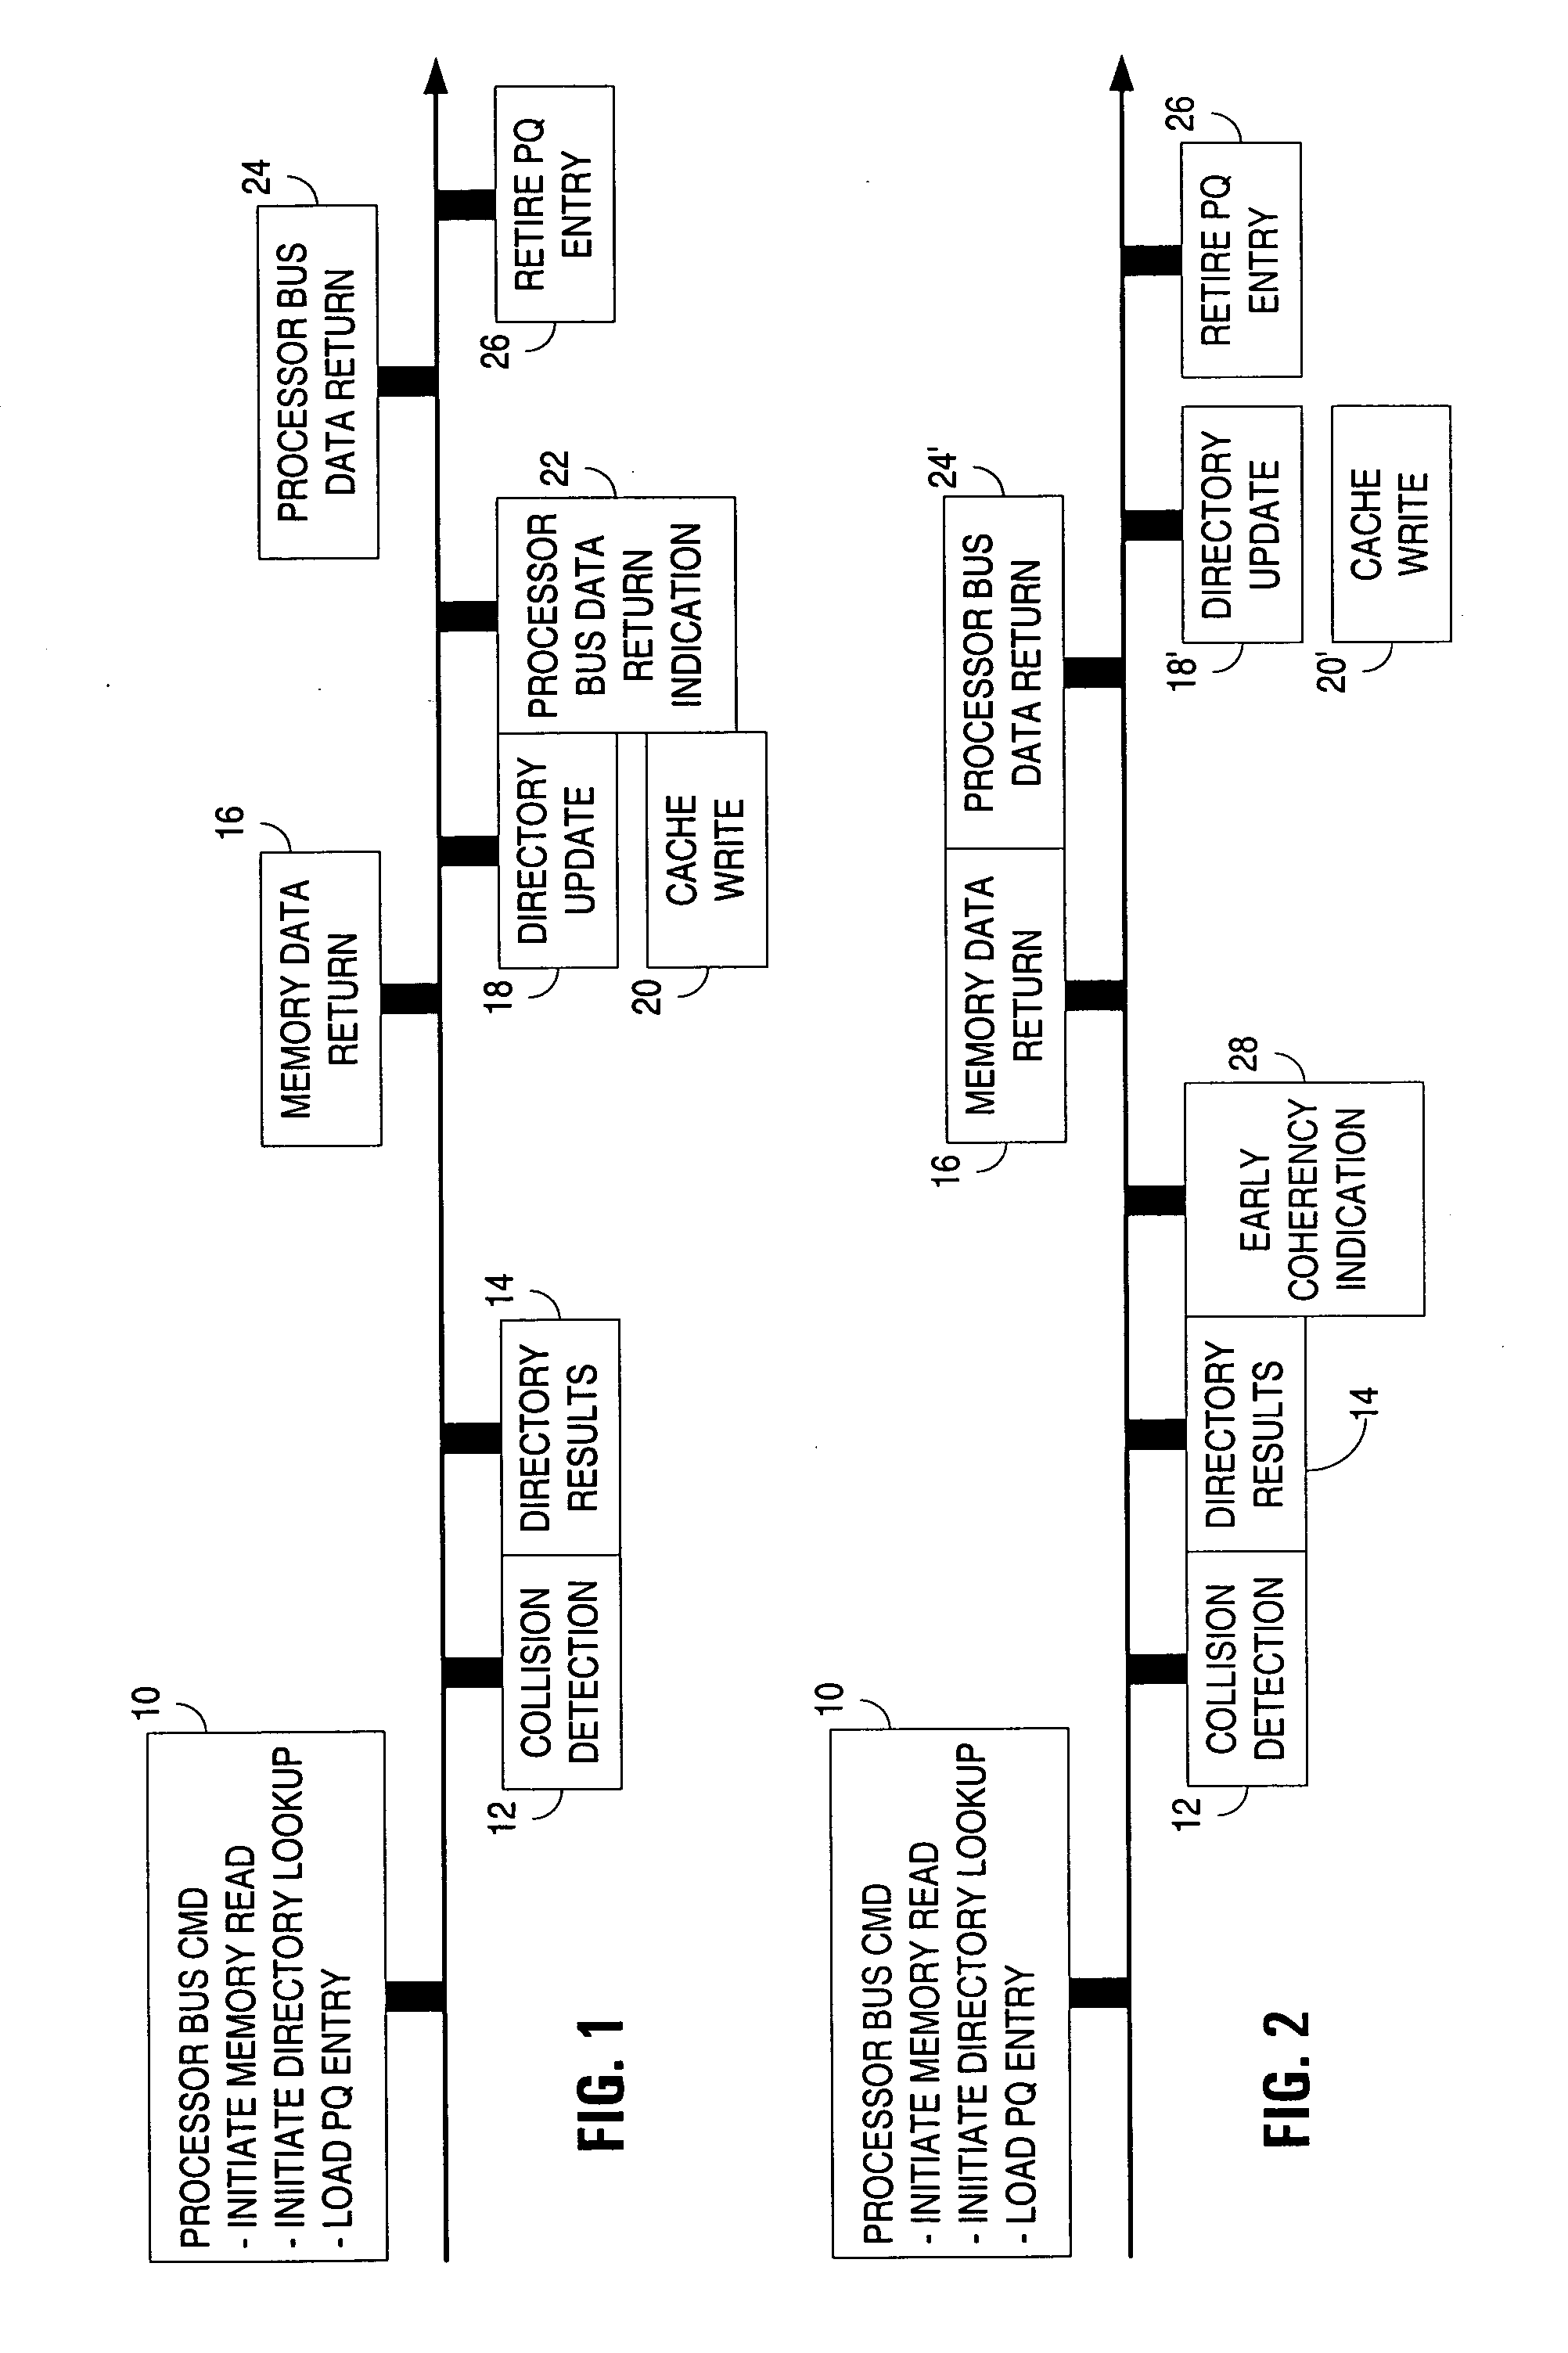 Early coherency indication for return data in shared memory architecture